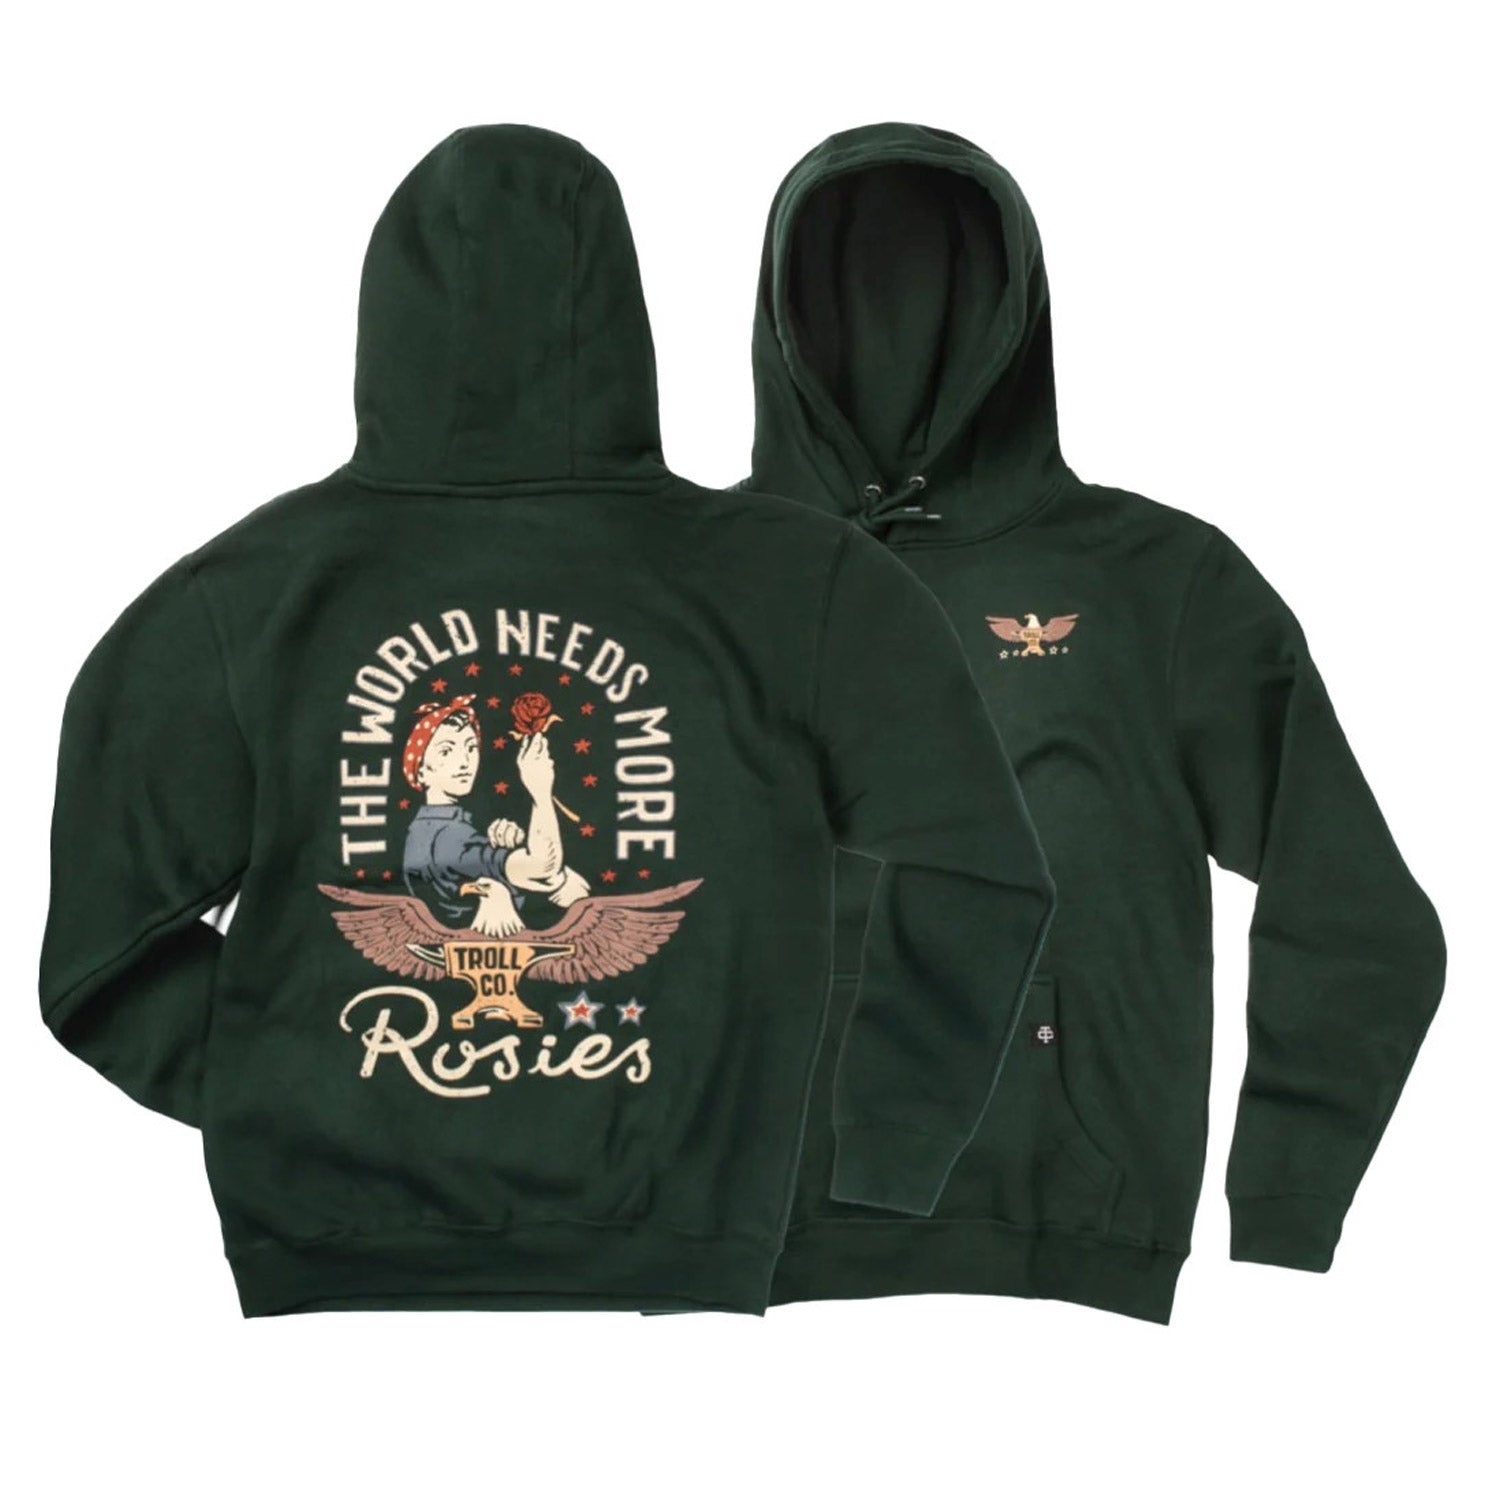 Troll Co. Women's "The World Needs More Rosies" Hoodie - Work World - Workwear, Work Boots, Safety Gear